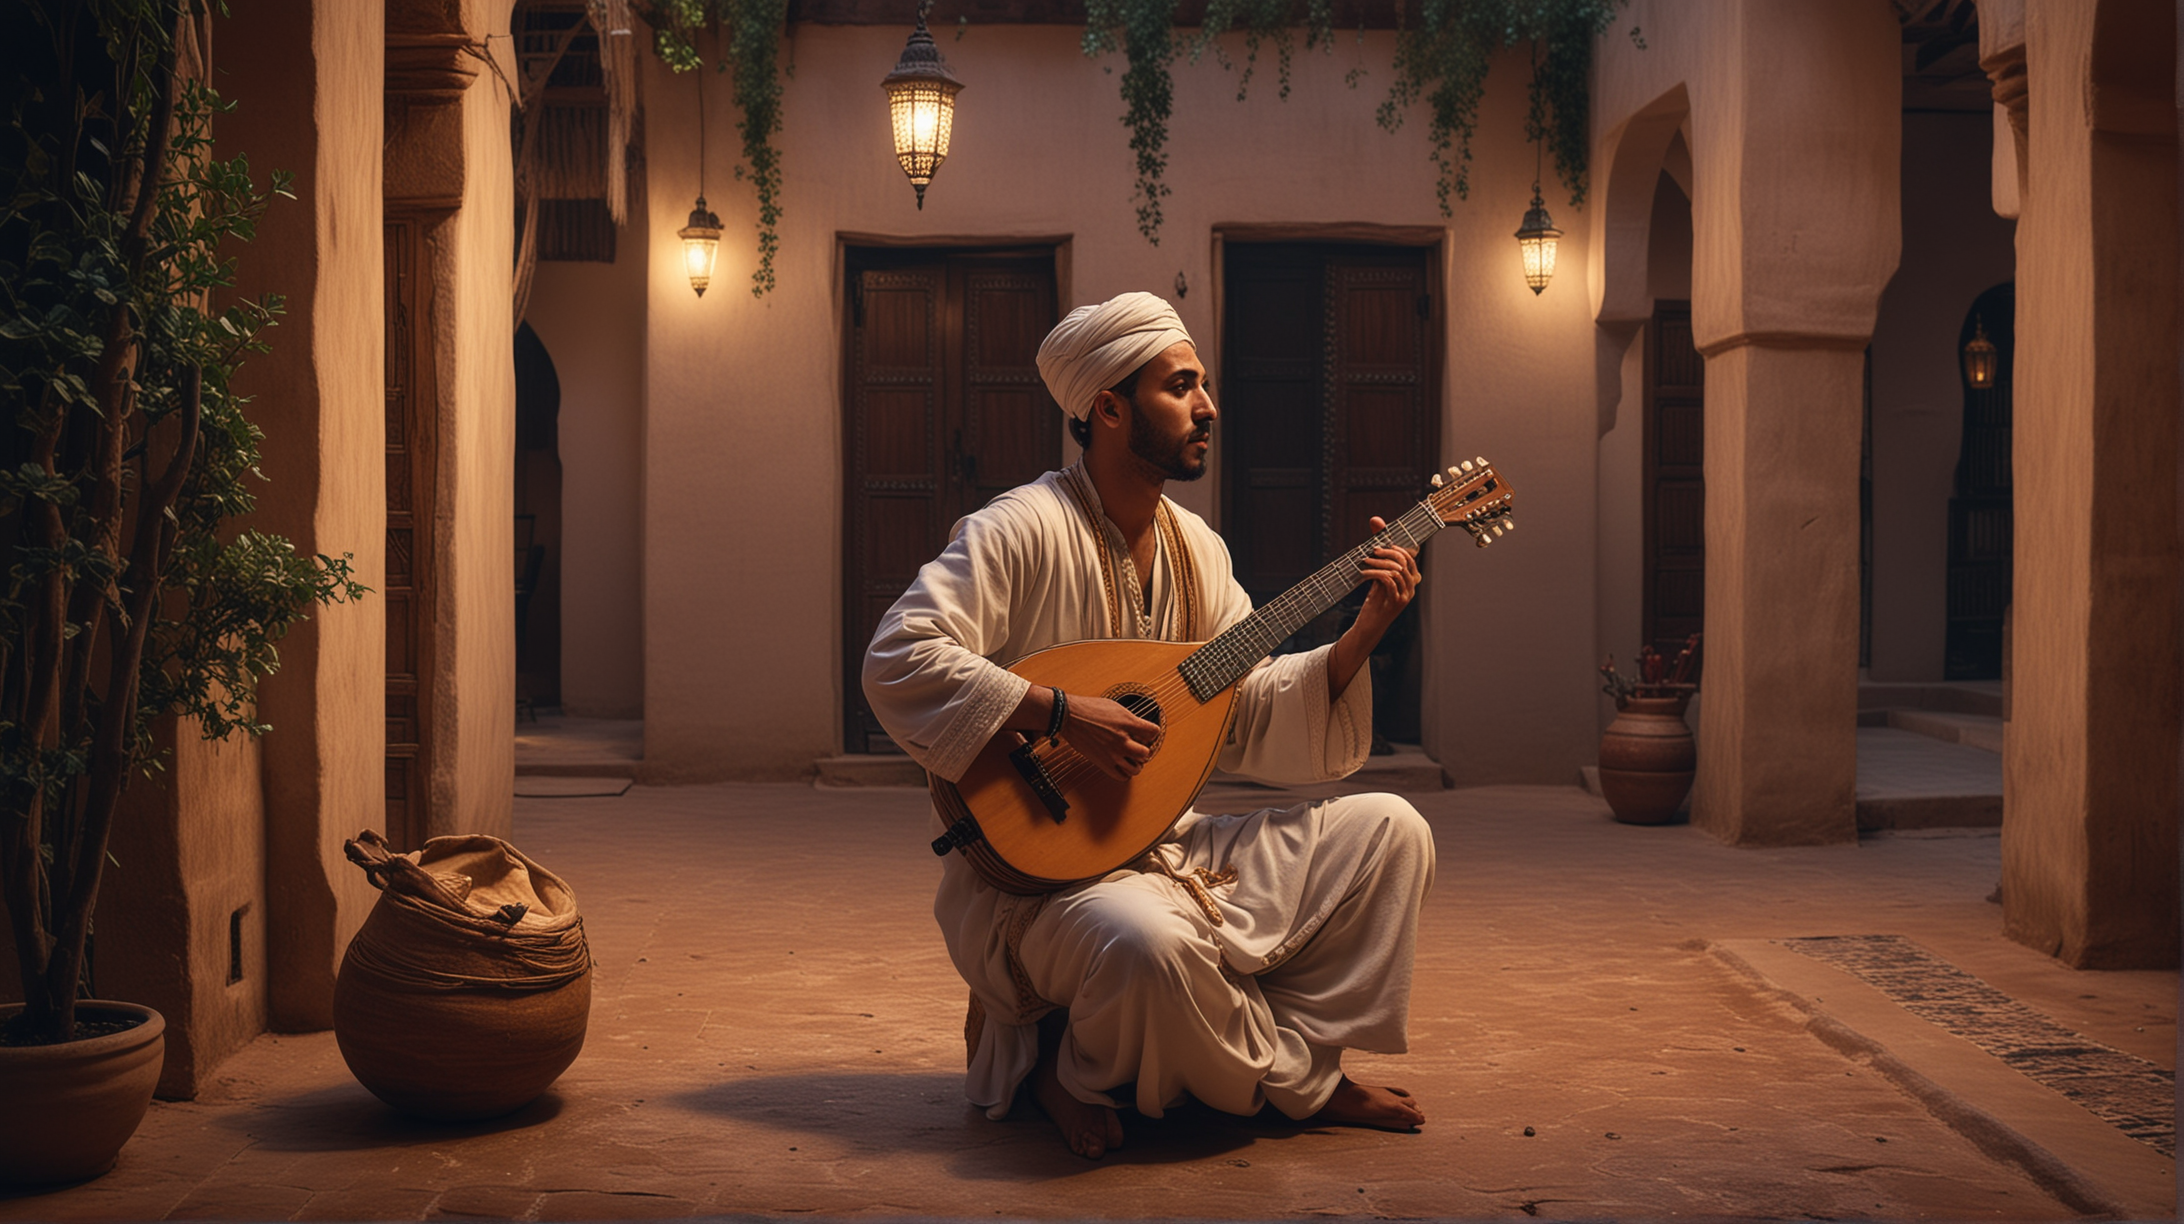 single Moroccan traditional musician (ONLY ONE, NOT TWO),  plays his lute in the courtyard of a Moroccan traditional house, strumming his lute, men sits around him enjoying the performance, night time, full moon shining, very realistic, cinematic, orientalist painters style